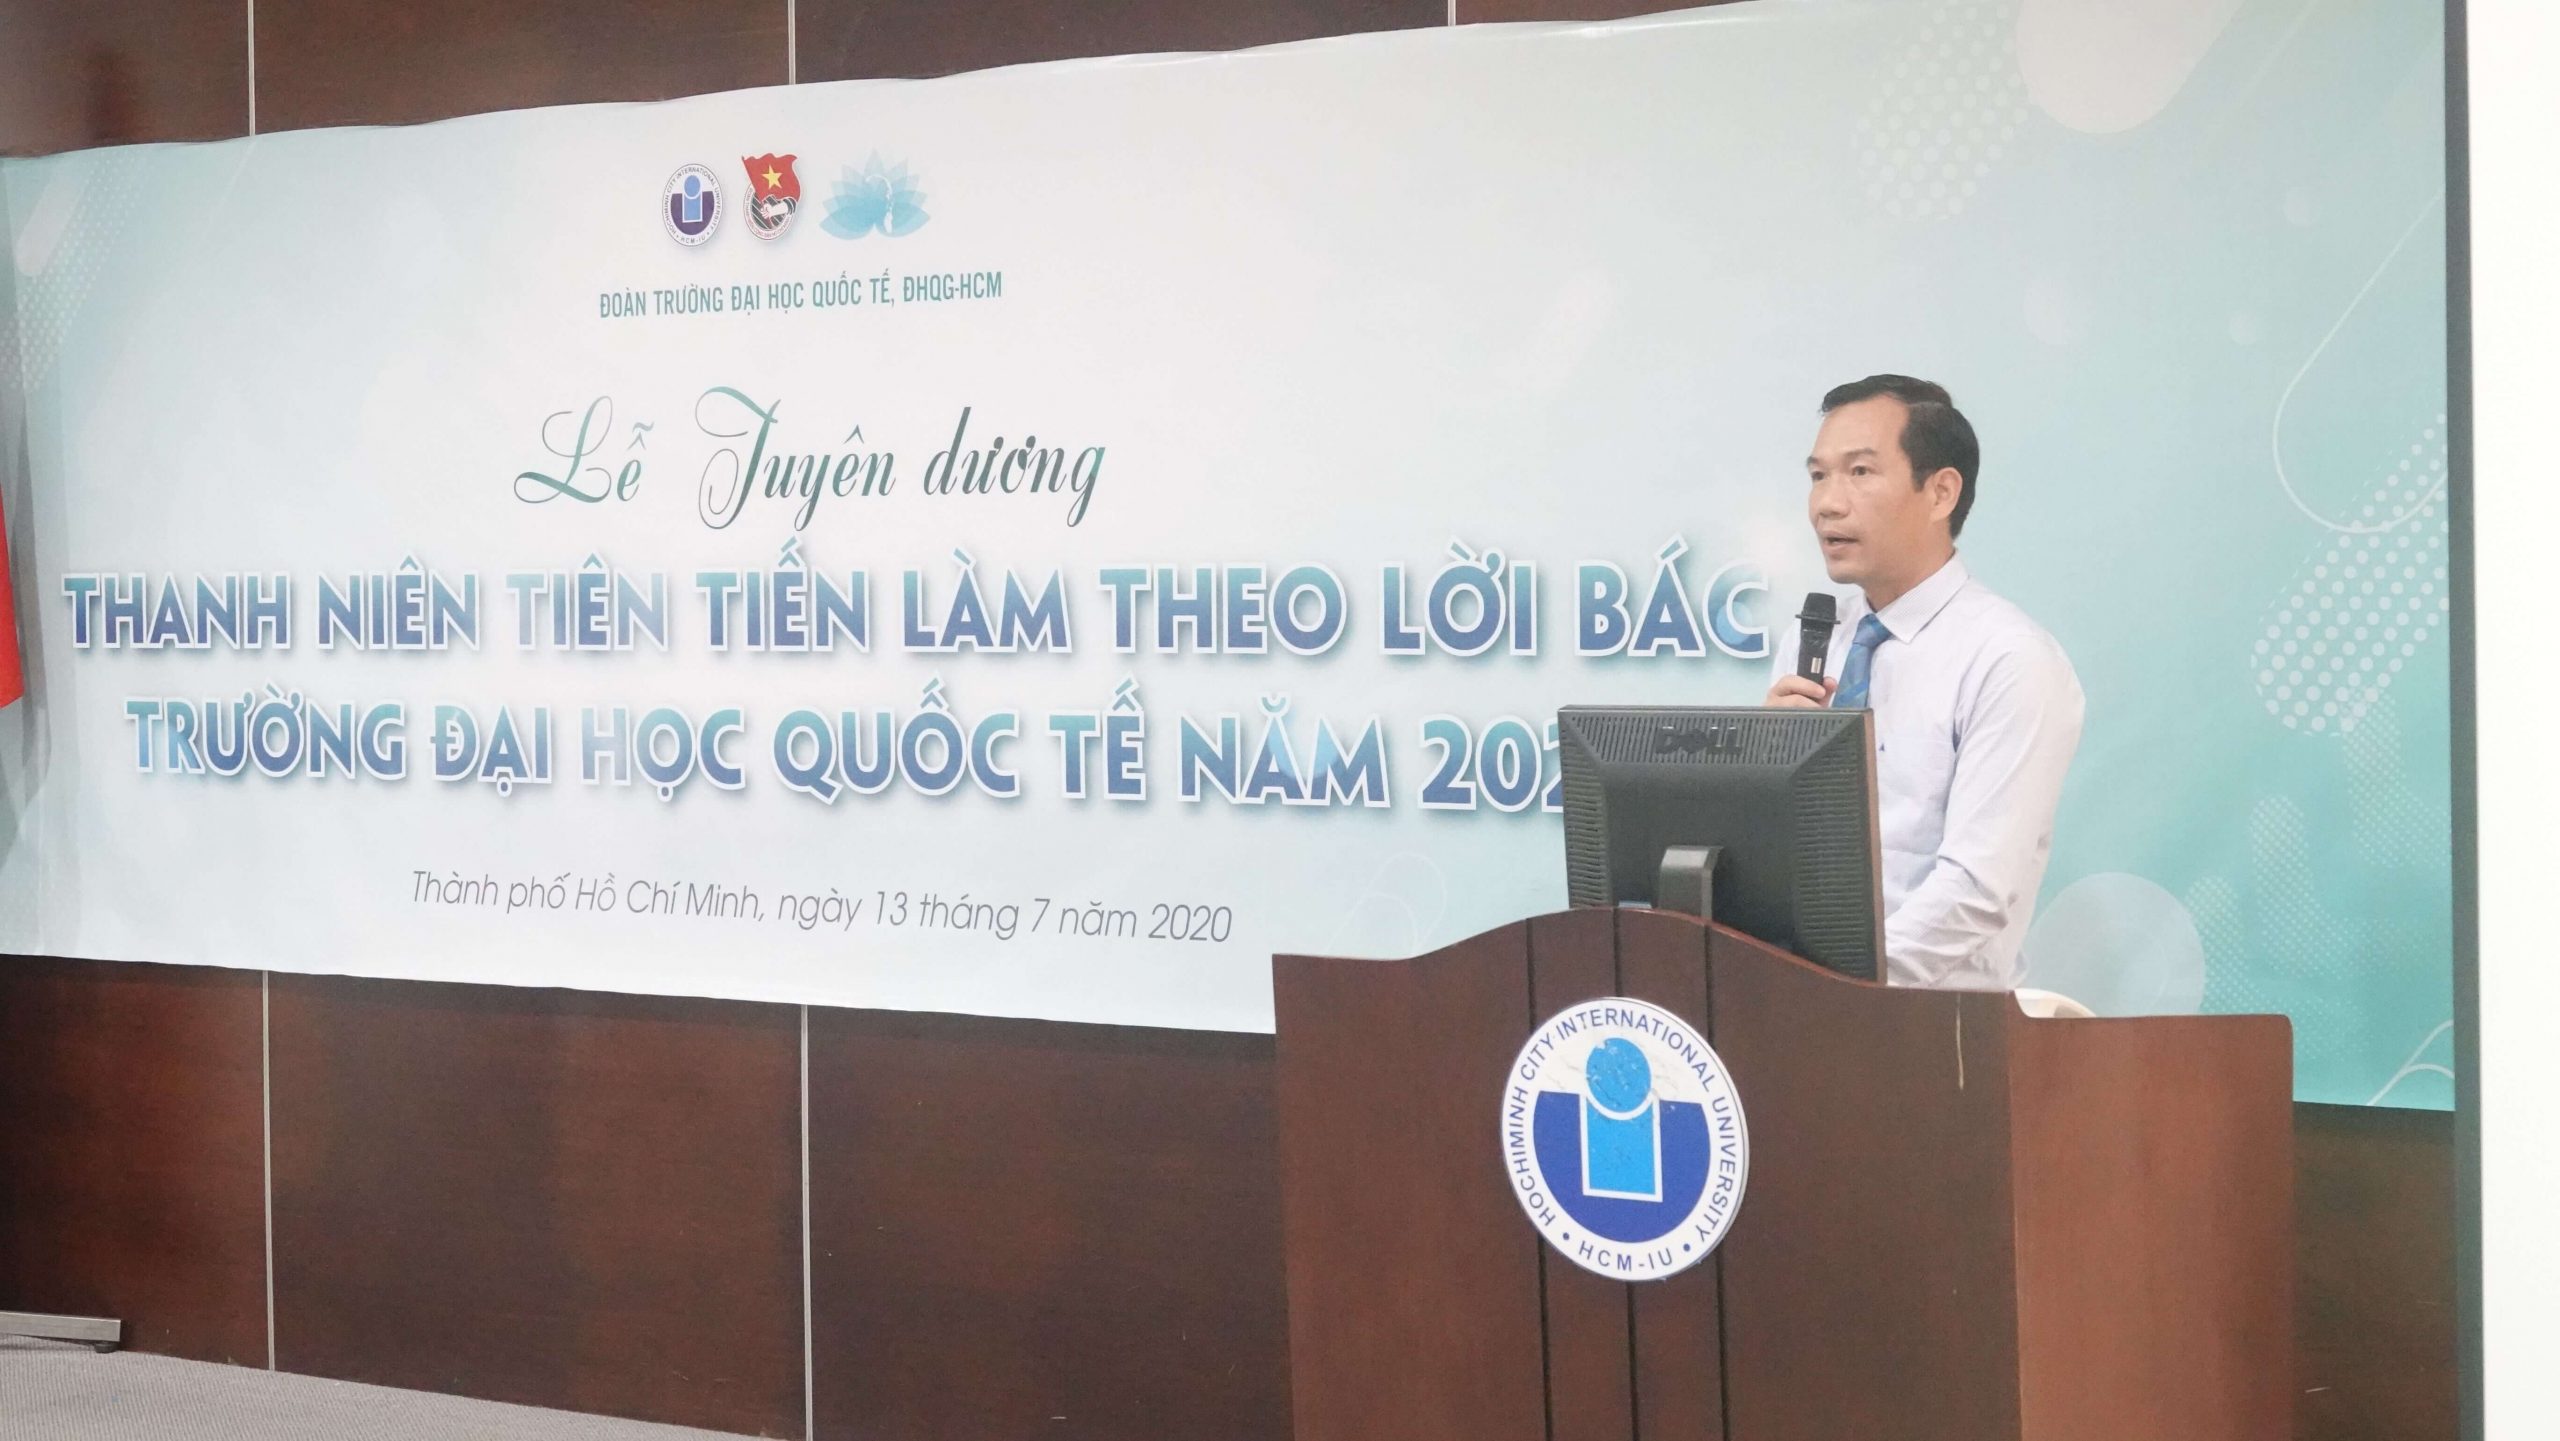 INTERNATIONAL UNIVERSITY HONORED 73 ADVANCED YOUNGSTERS PEOPLE SETTING GOOD EXAMPLES IN FOLLOWING UNCLE HO’S WORDS